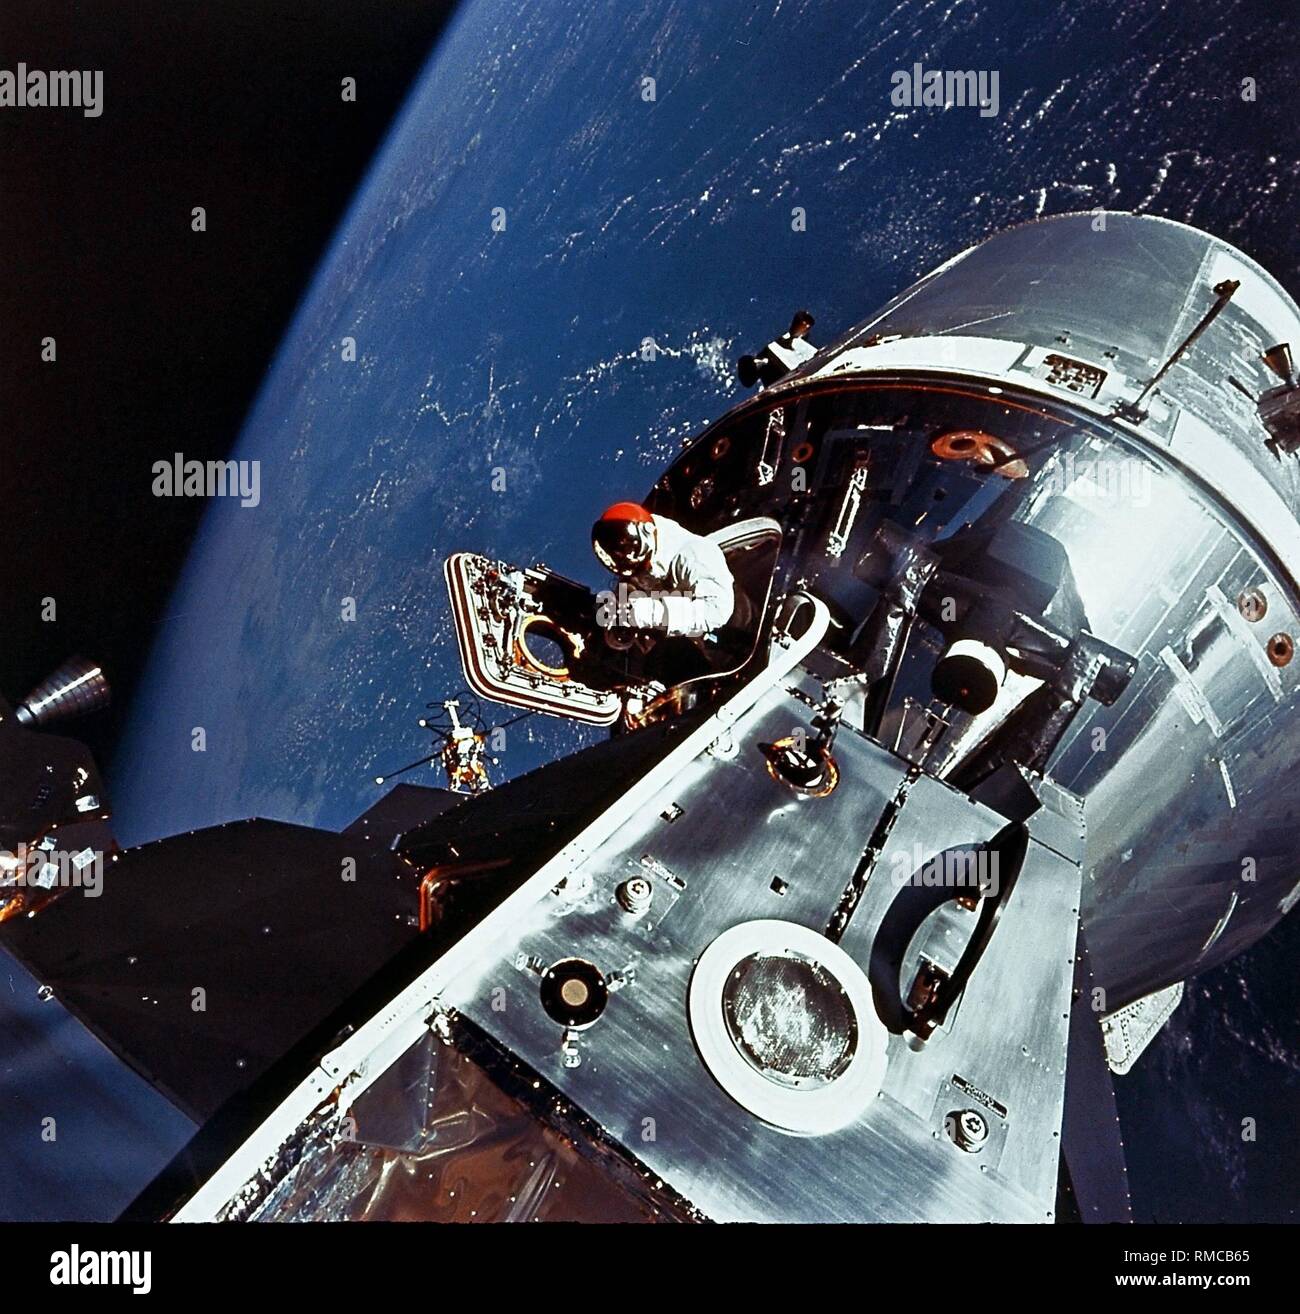 David R. Scott, astronaut of Apollo 9 doing an EVA exercise in the open hatch of the Command Module 'Gumdrop', which is paired with the Lunar Module 'Spider'. The photograph shows the spacecraft in its position above the Mississippi area. Apollo 9 (03.-13.03.1969) was the first manned mission of an orbit around the earth that had all Apollo equipment and included the first flight of a Lunar Module. Stock Photo